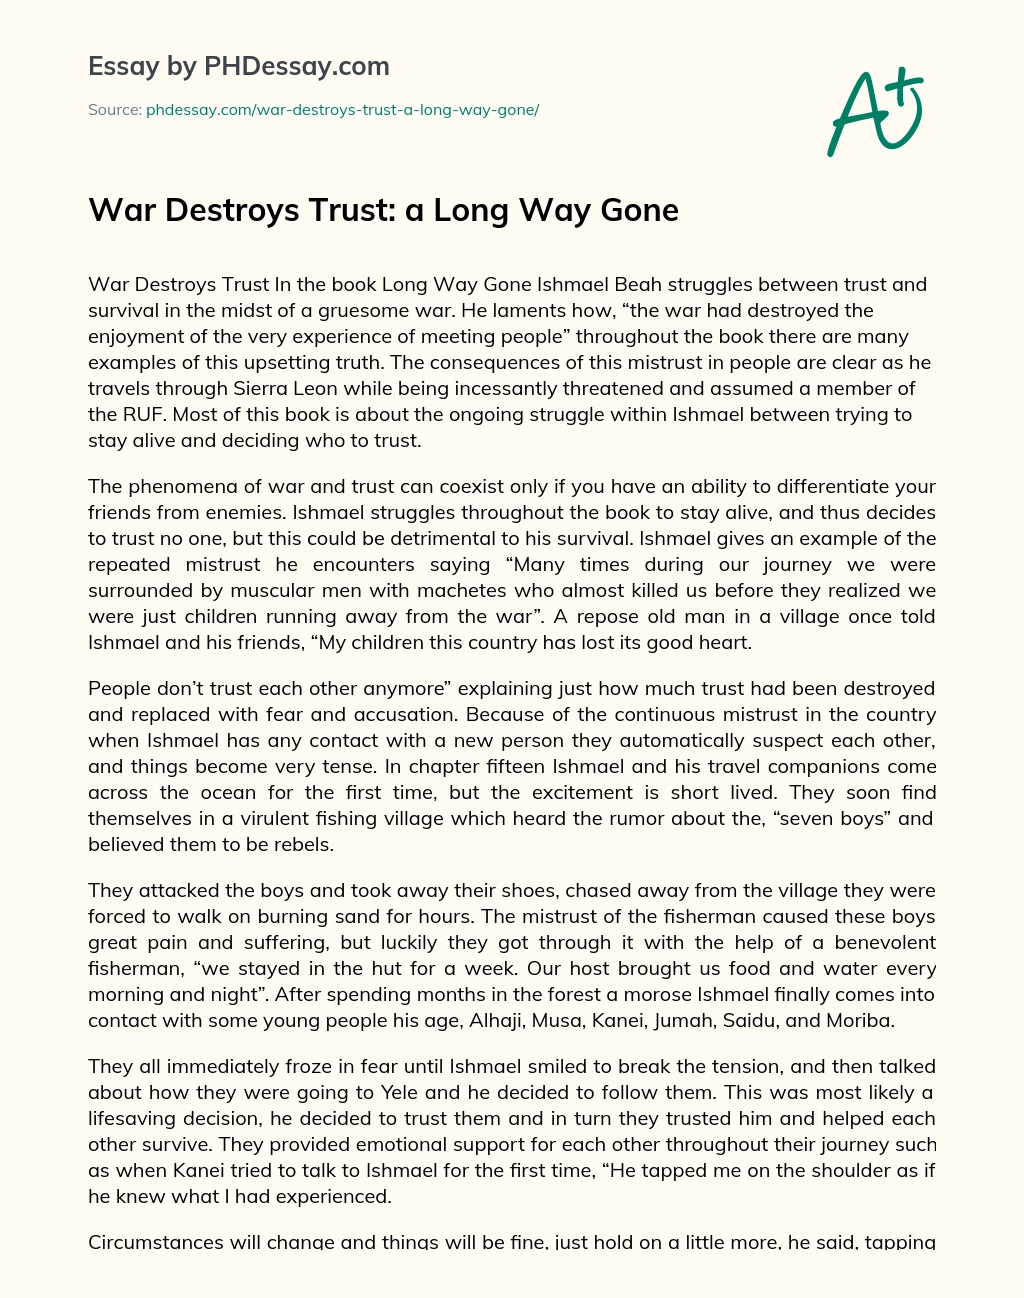 a long way gone essay prompts